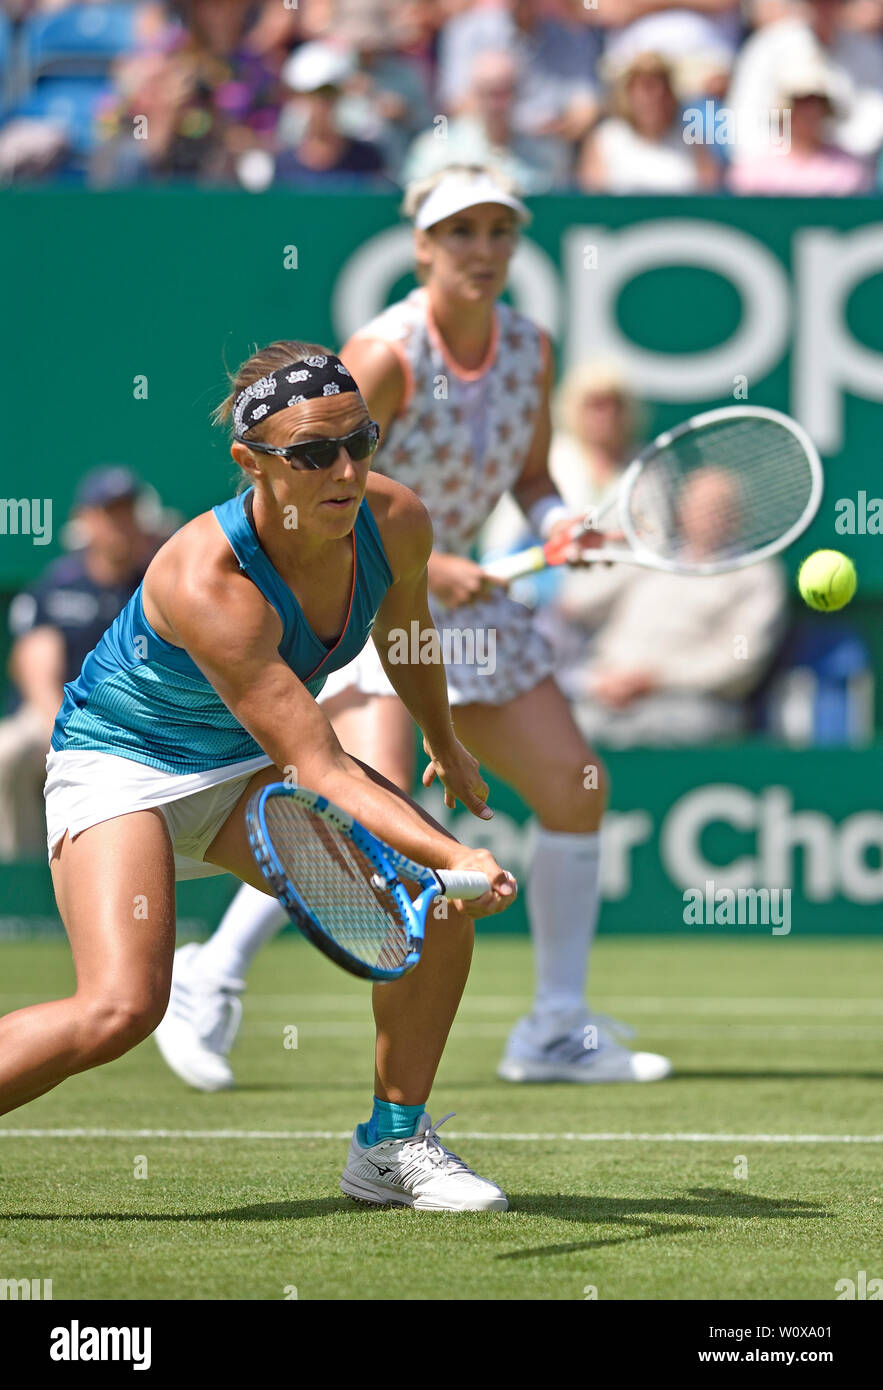 Kirsten Flipkens (Ned - sunglasses) and Bethanie Mattek-Sands (USA) playing in the semi final of the ladies doubles at the Nature Valley International tennis at Devonshire Park, Eastbourne, UK. 28th June, 2019. Stock Photo